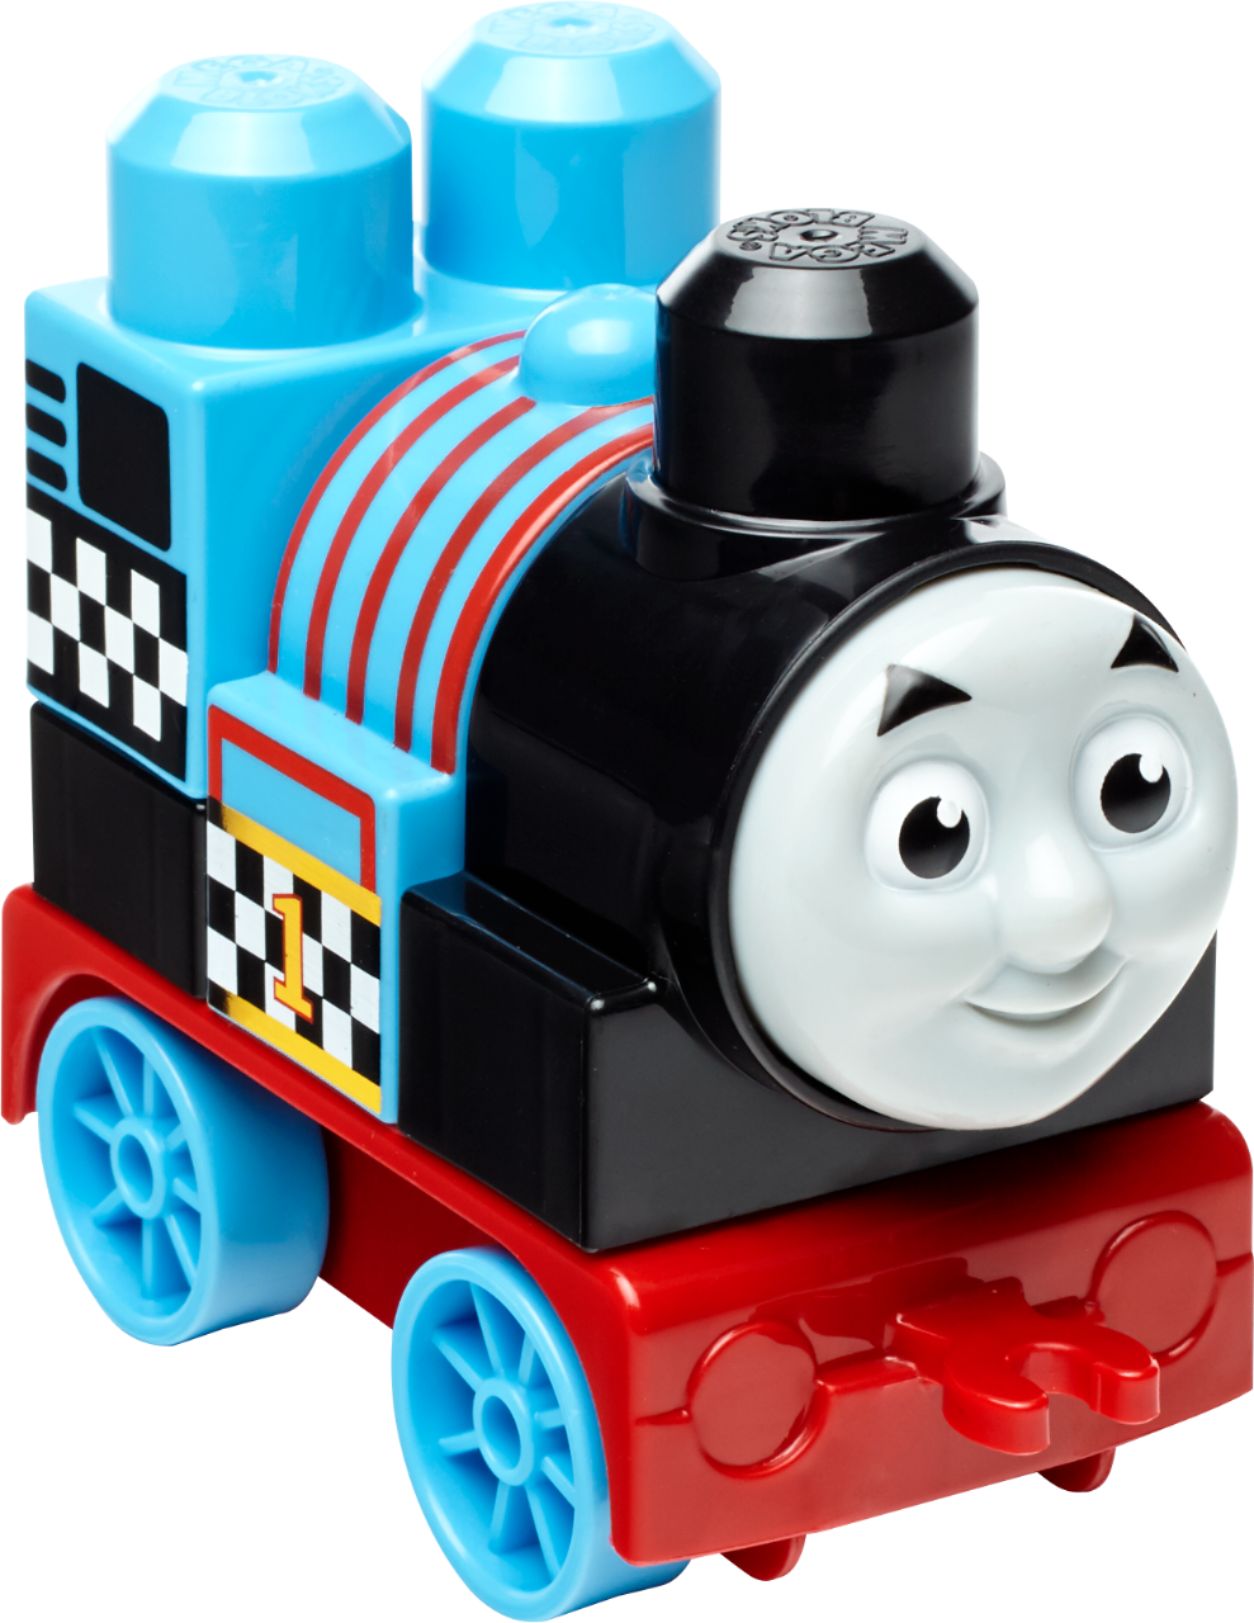 pictures of thomas the train and friends